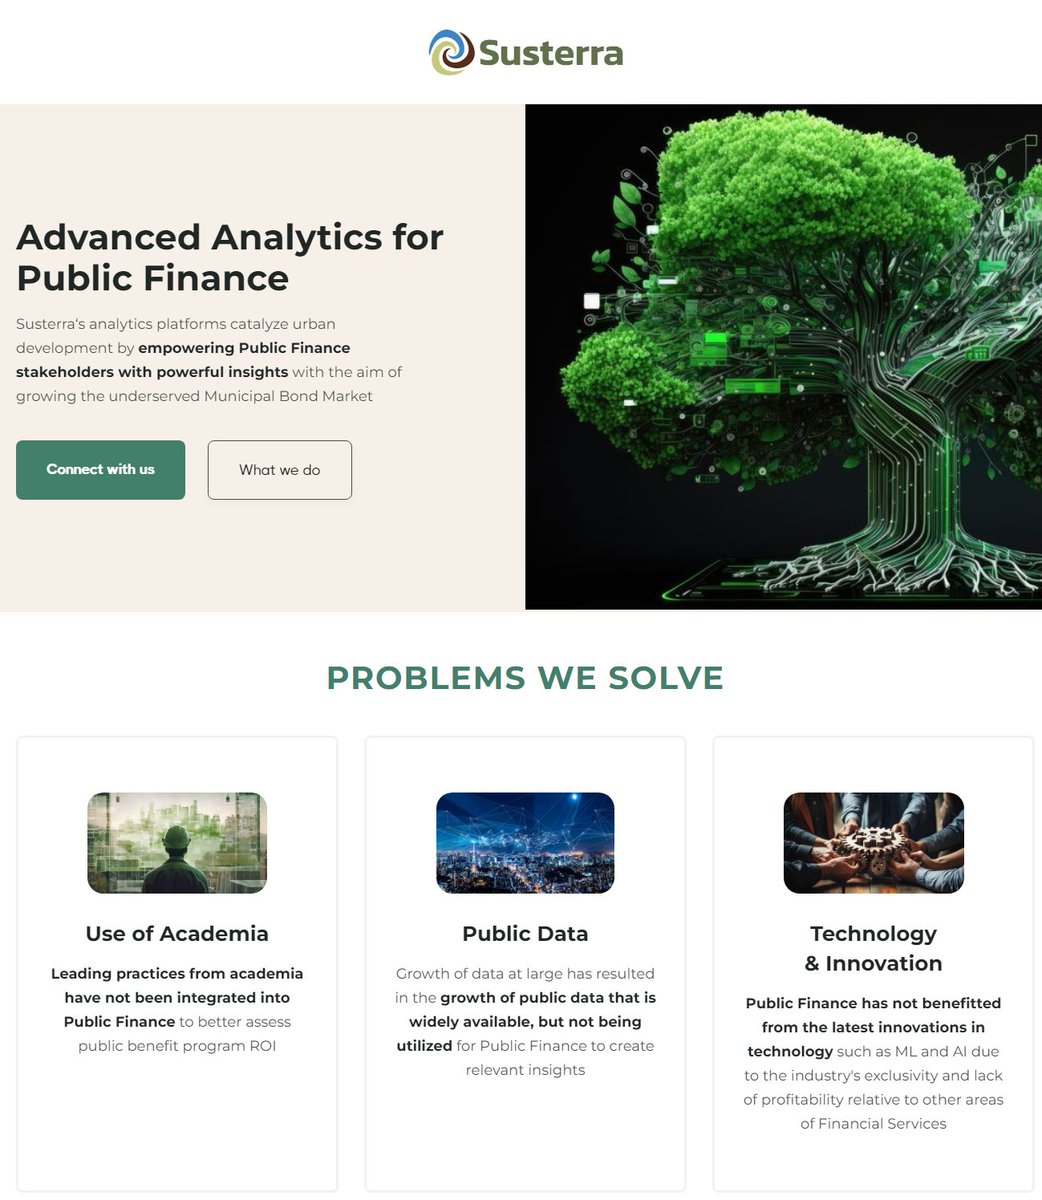 AI Tool of the Day: Susterra

Susterra is an advanced analytics platform that focuses on public  finance, specifically the underserved Municipal Bond Market. 

ai-search.io/tool/susterra

#ai #aitools #chatGPT #GPT4 #Productivity #Finance #InvestmentTips #InvestmentOpportunity